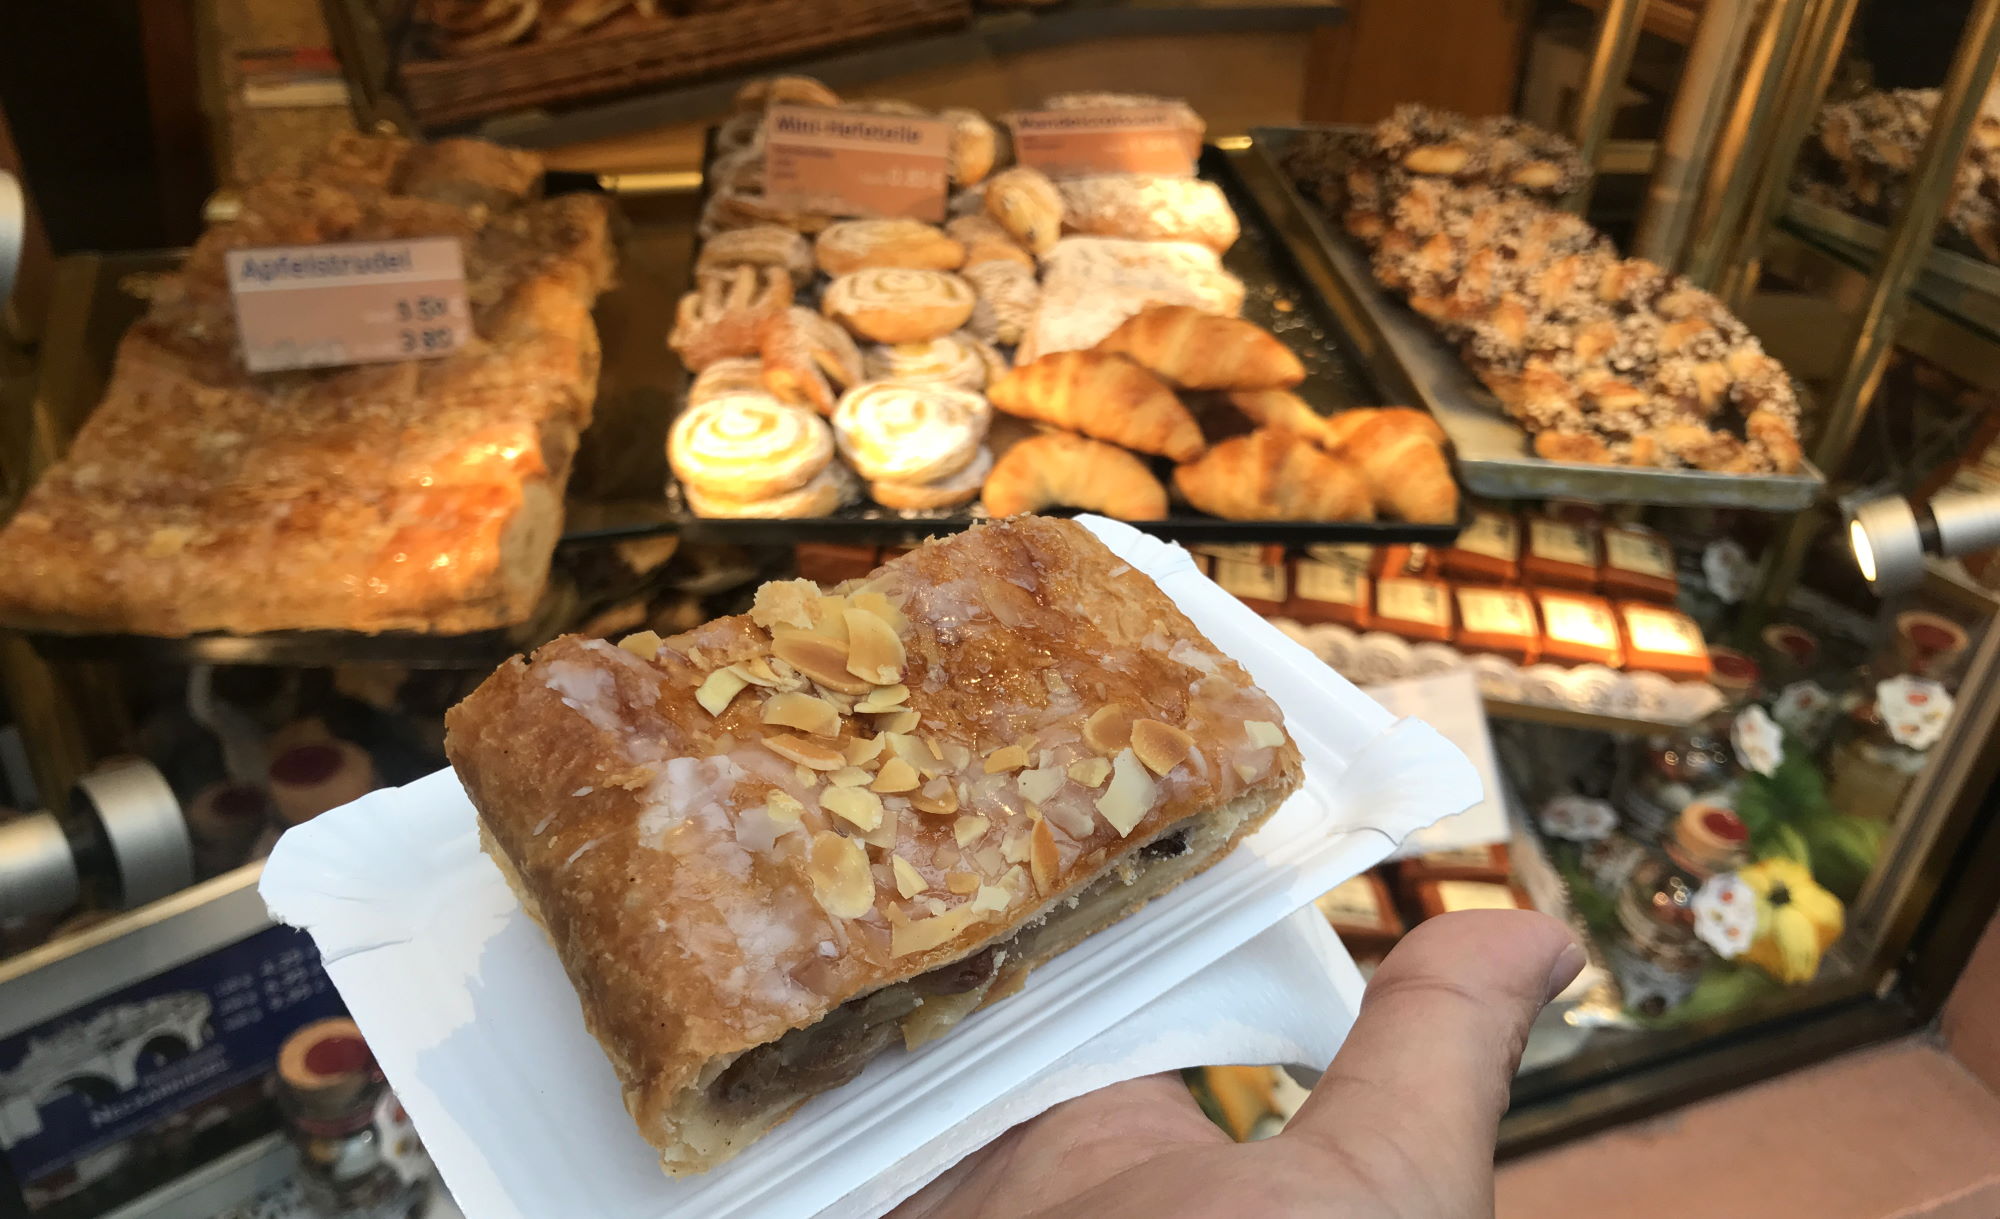 Apple strudel with amazing pastries in the background